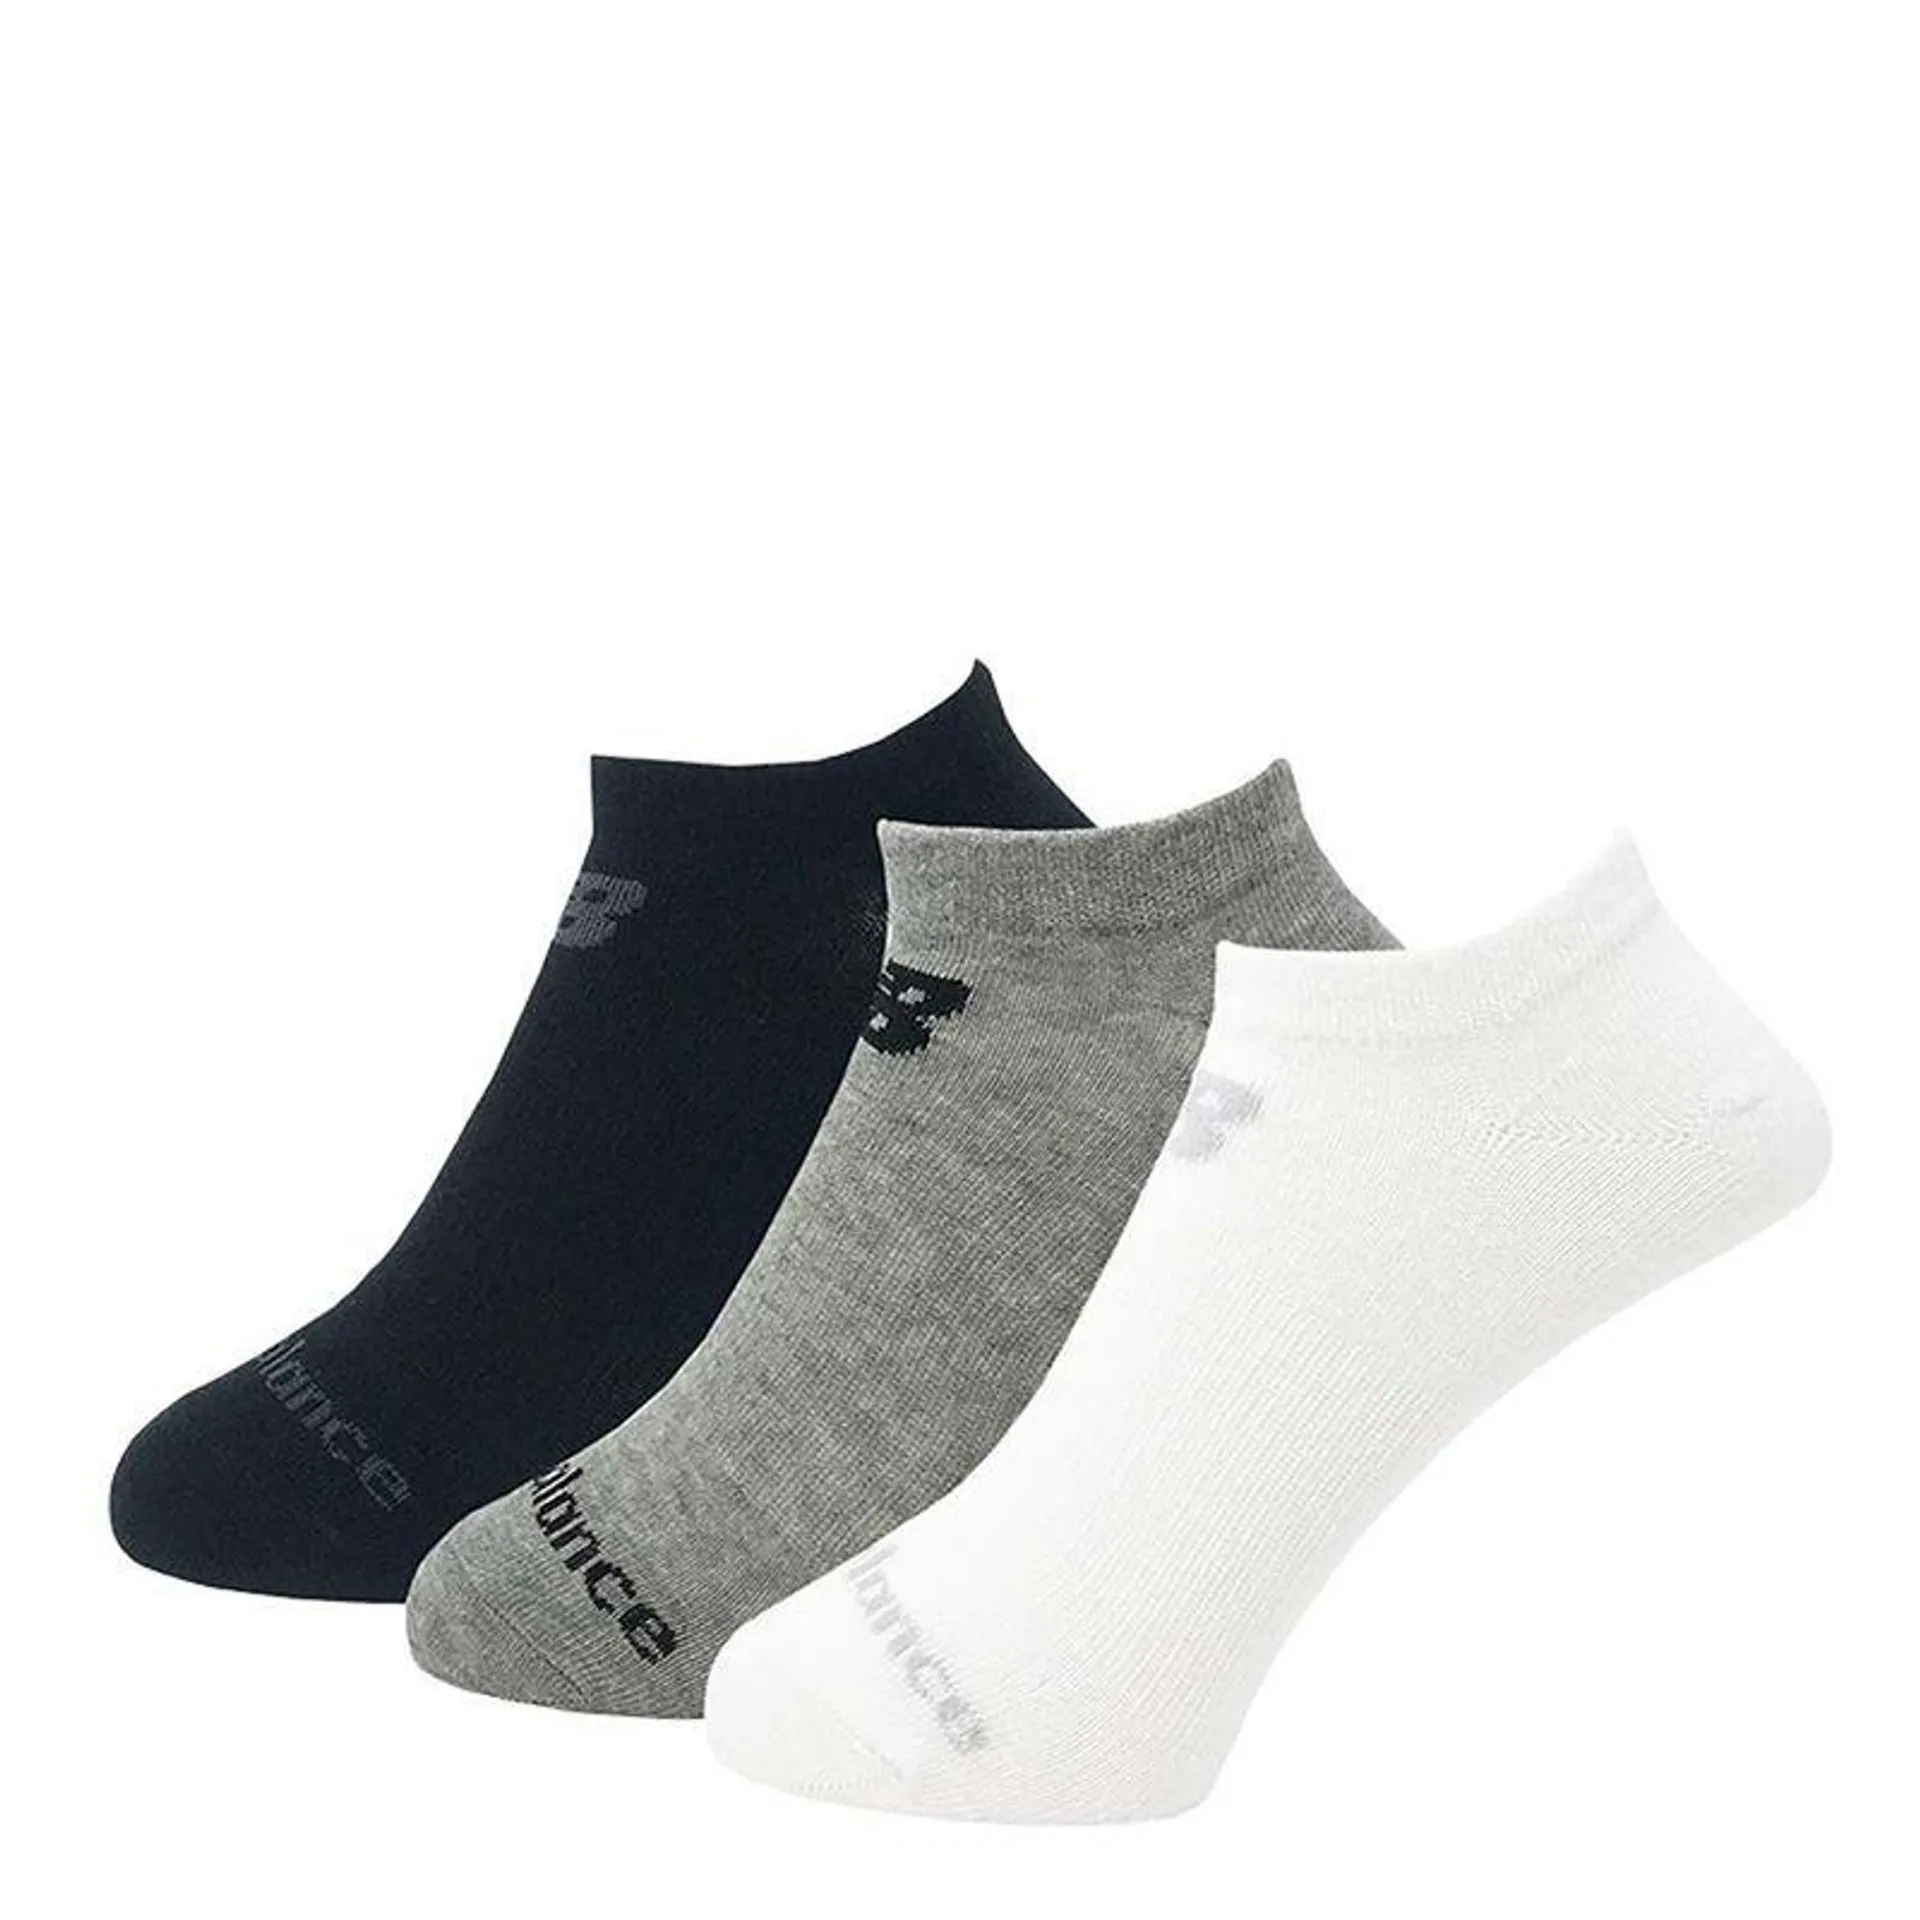 Medias Invisibles Para Hombre Socks Unseen 3 Pack New Balance